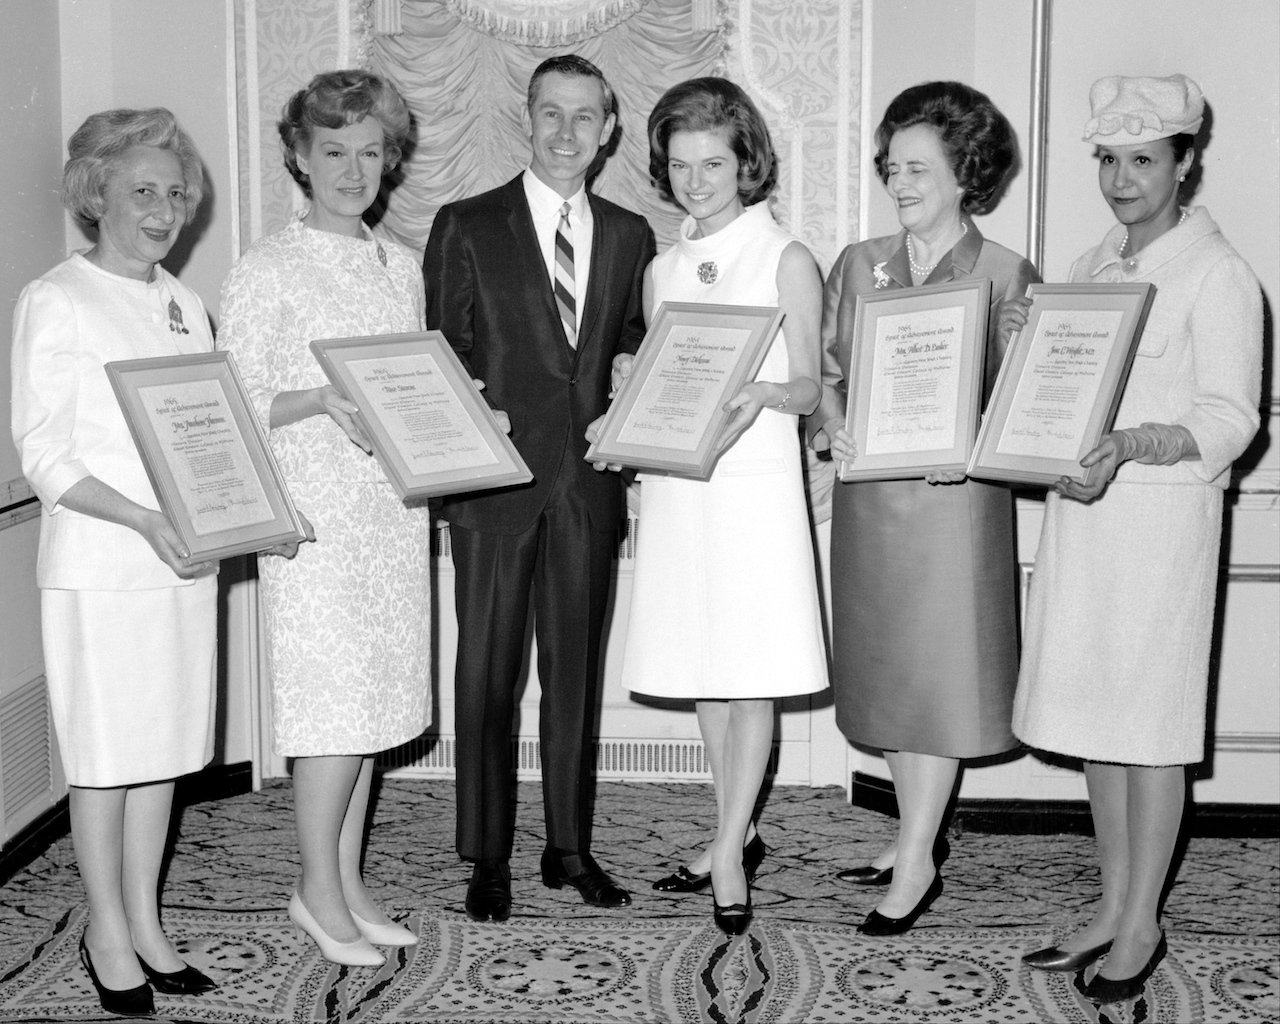 Johnny Carson presents the Spirit of Achievement awards to a group of distinguished women c. 1965